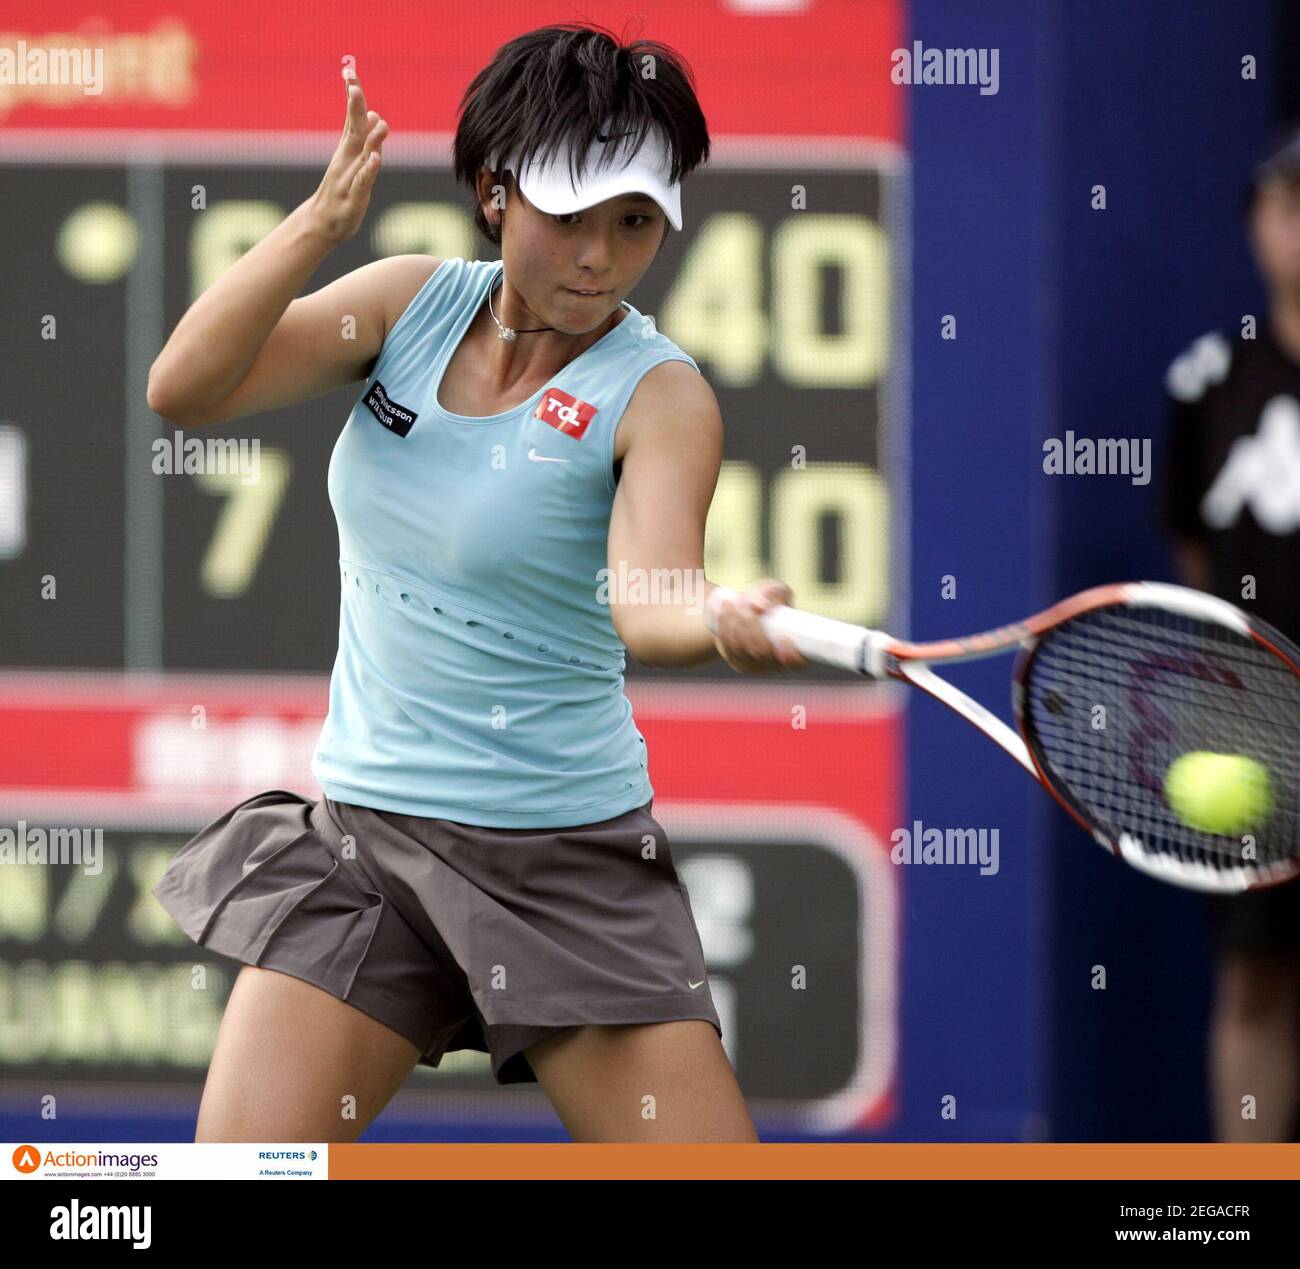 Tennis - Sony Ericsson WTA Tour - China Open - Beijing, China - 23/9/07  Yi-Fan Xu in action during the doubles final Mandatory Credit: Action  Images / Brandon Malone Livepic Stock Photo - Alamy